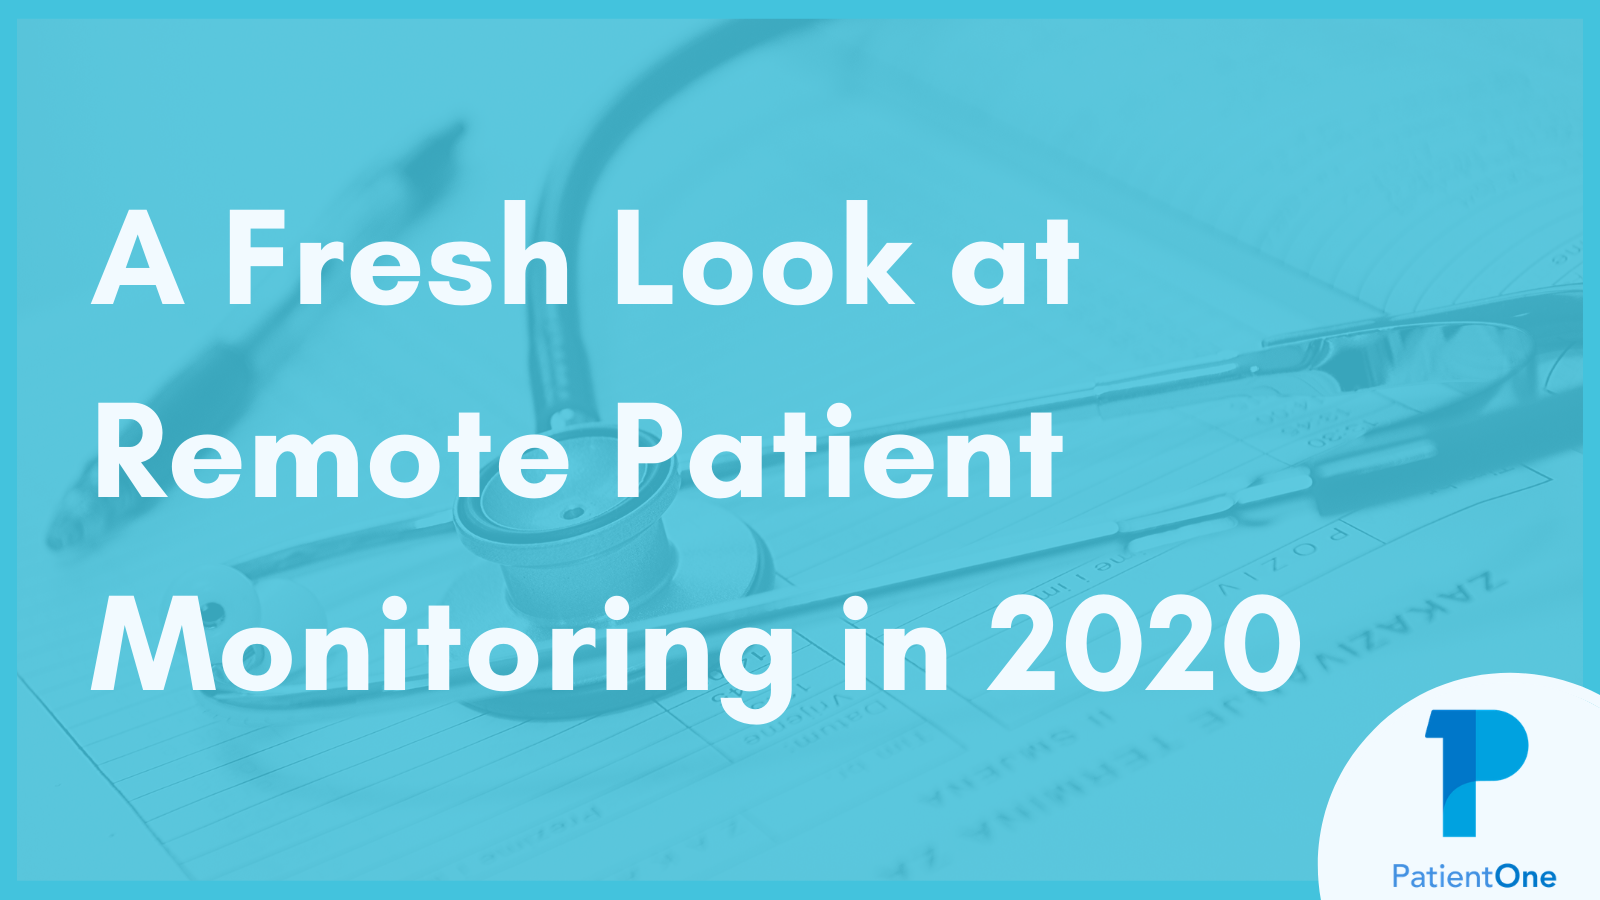 Image describing the fresh look at Remote Patient Monitoring in 2020